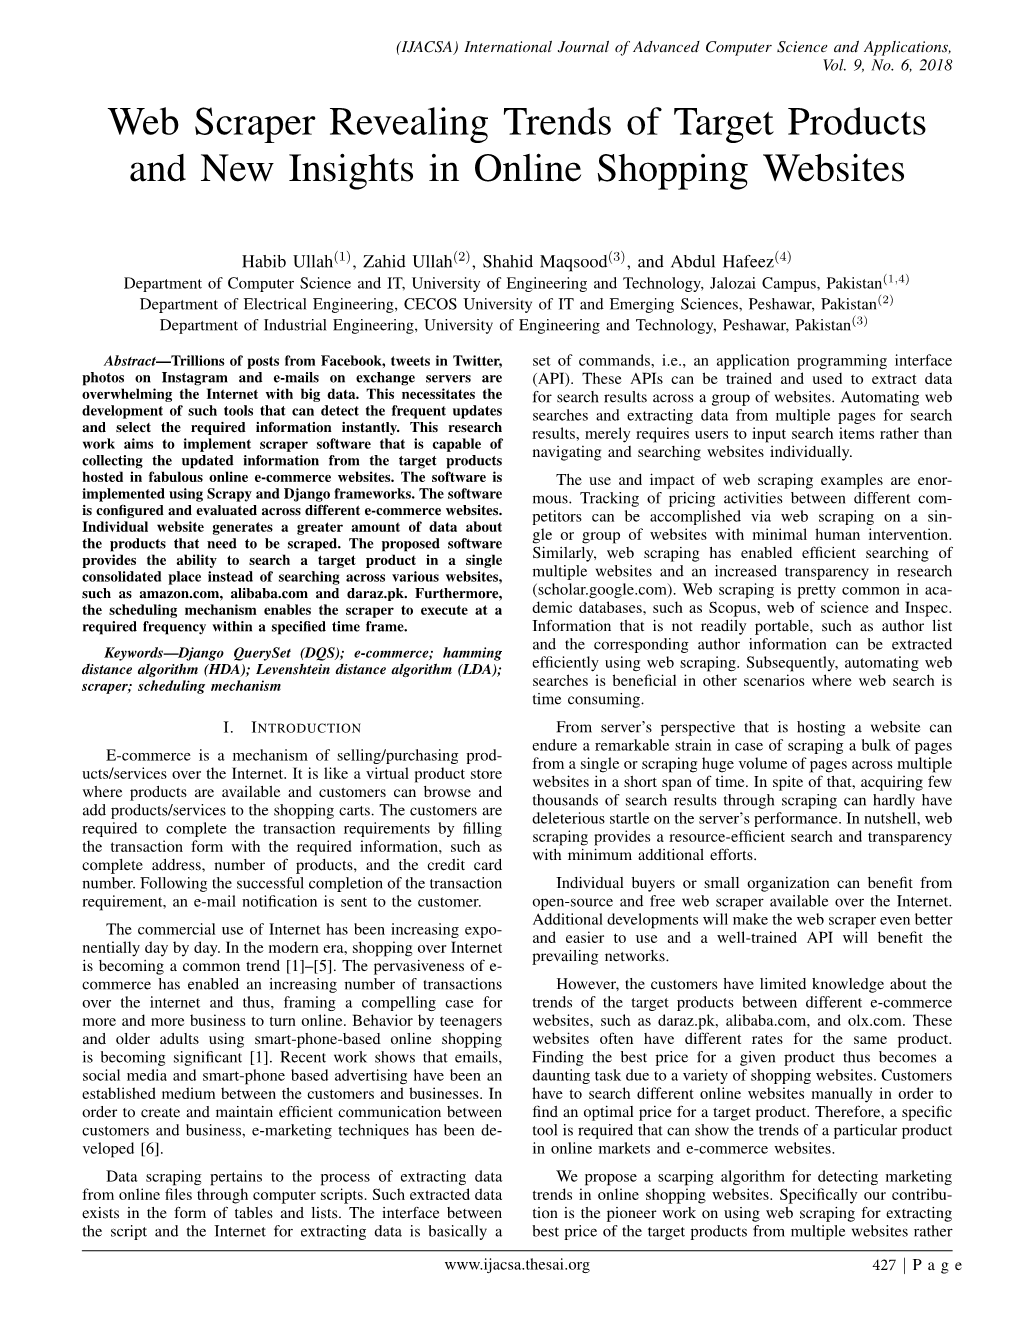 Web Scraper Revealing Trends of Target Products and New Insights in Online Shopping Websites